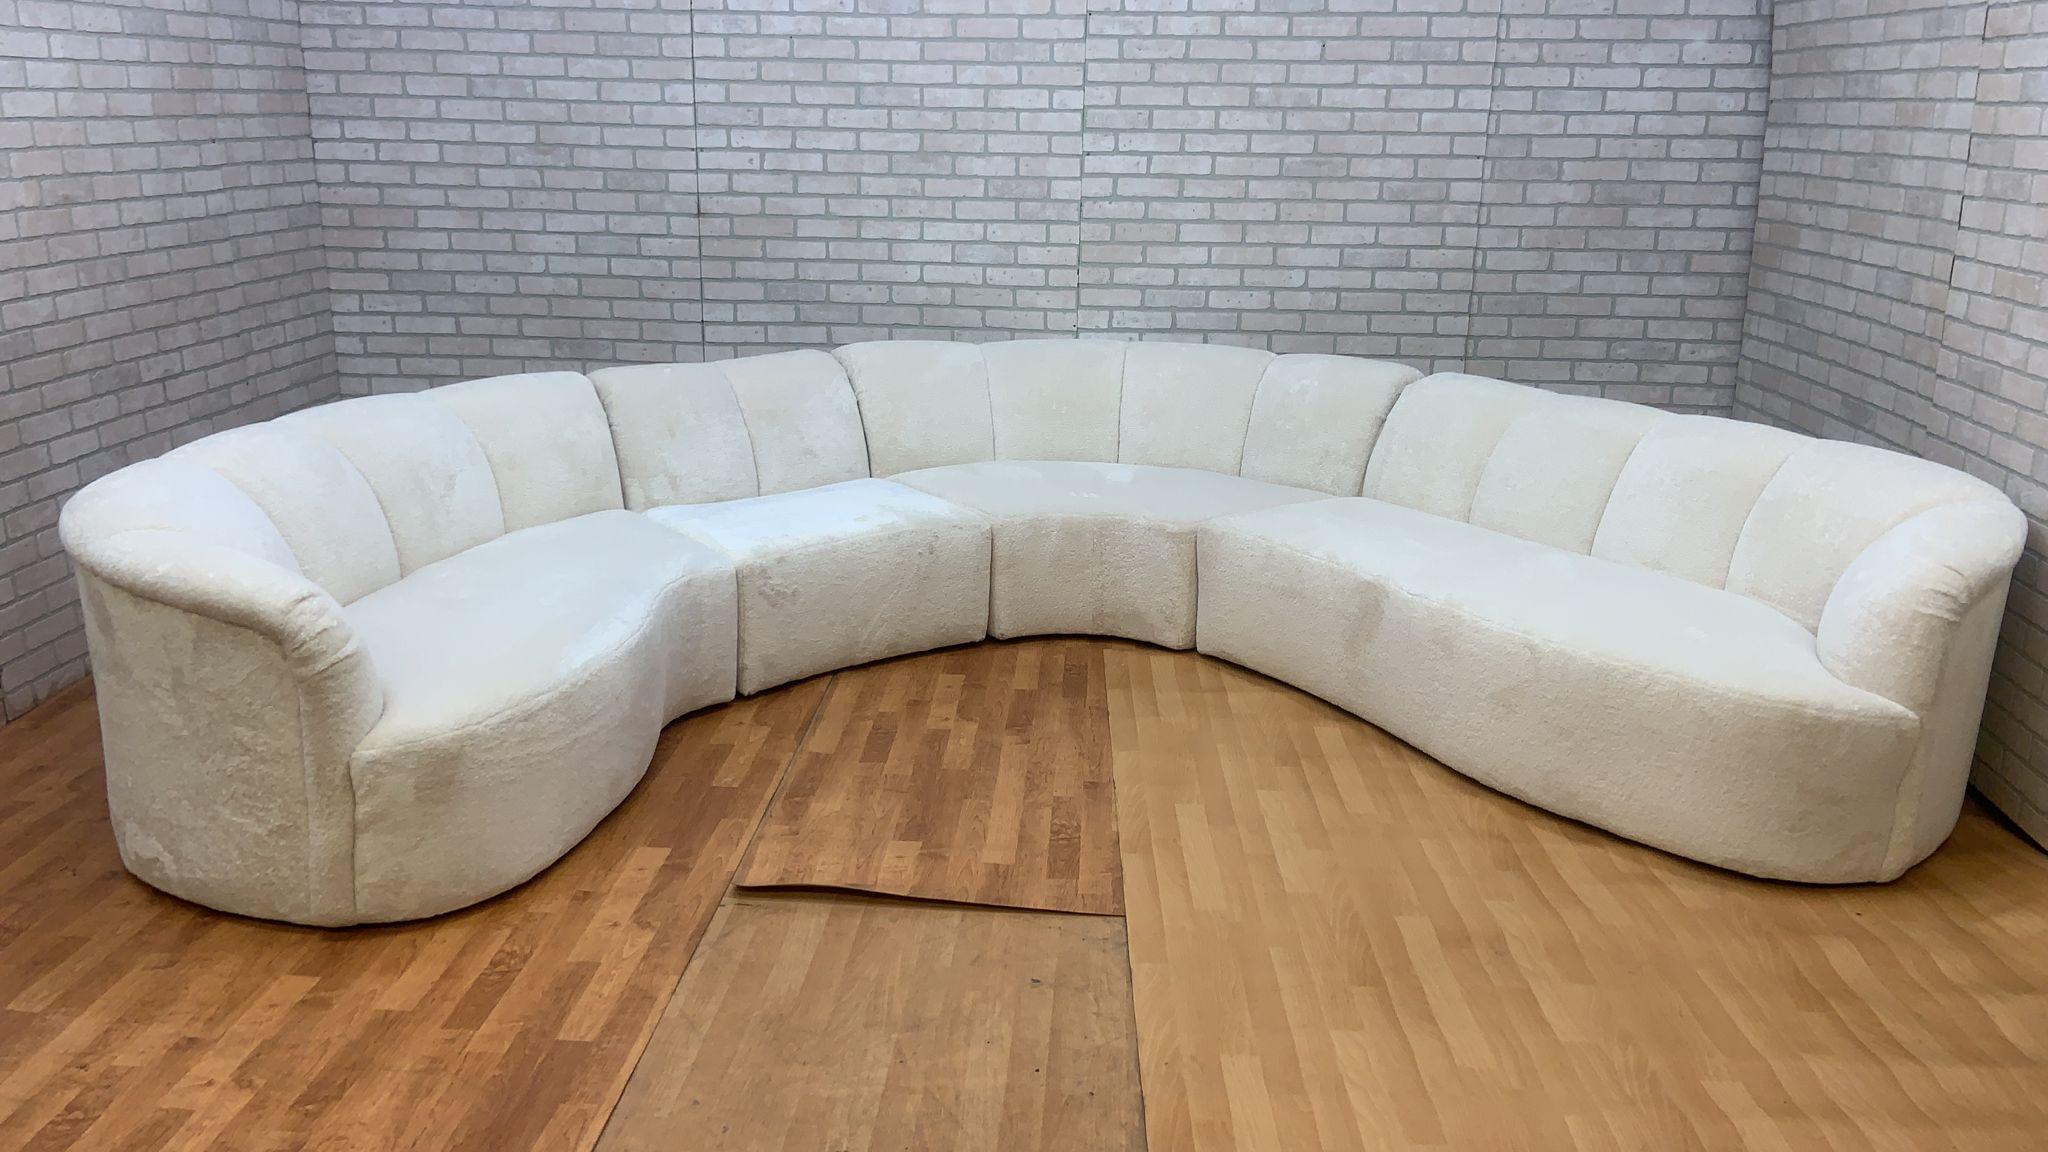 Curved Channel Back Serpentine Sectional Sofa Newly Upholstered in Alpaca Wool 4